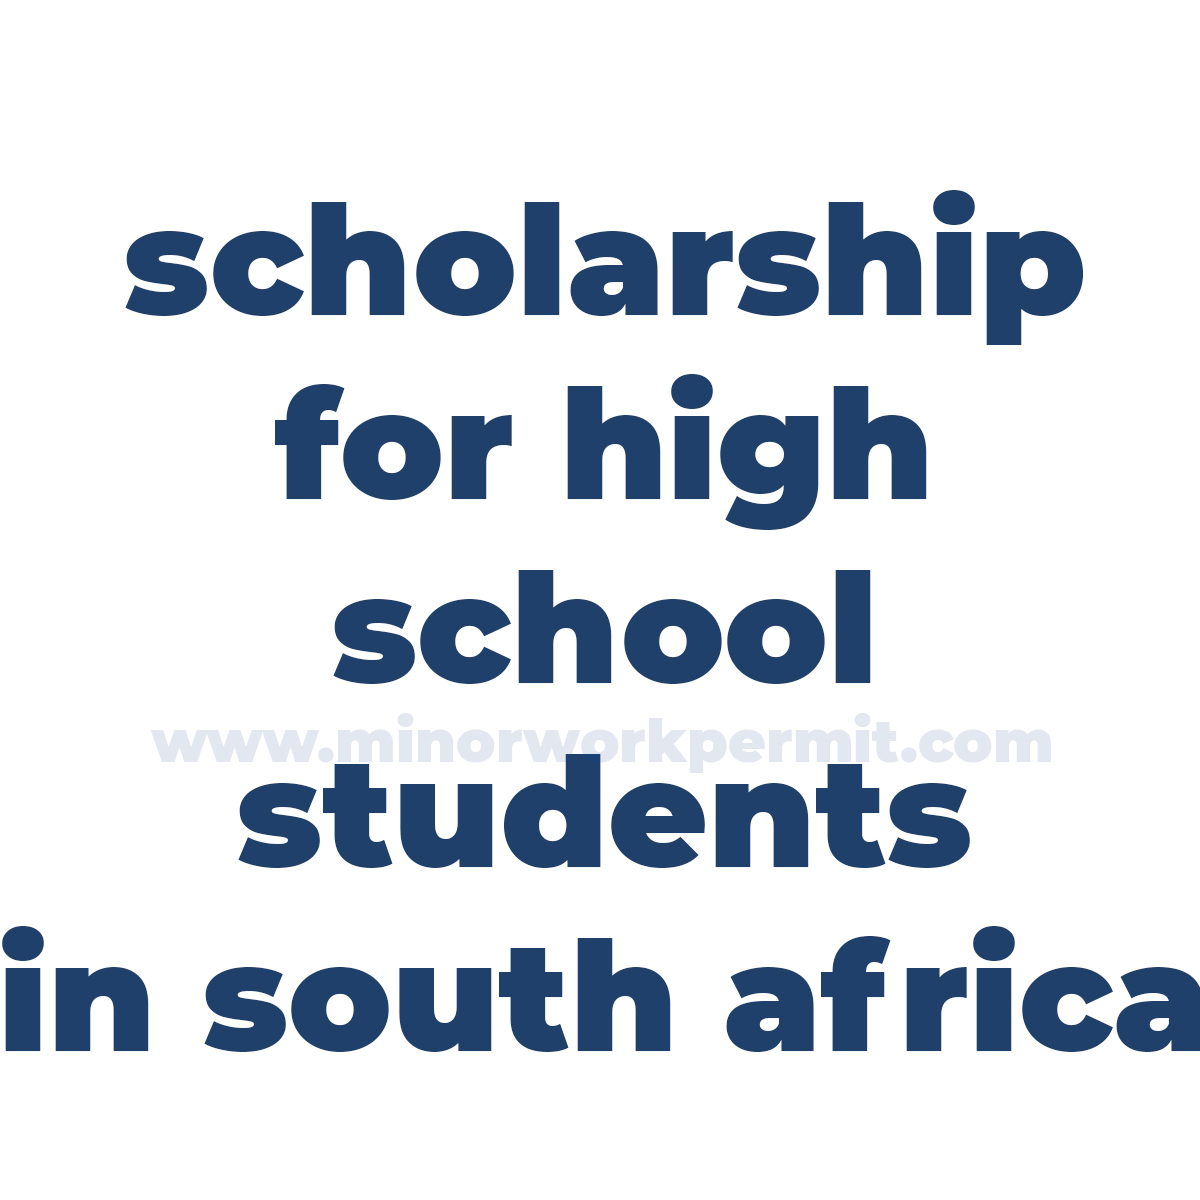 Scholarship For High School students in south africa